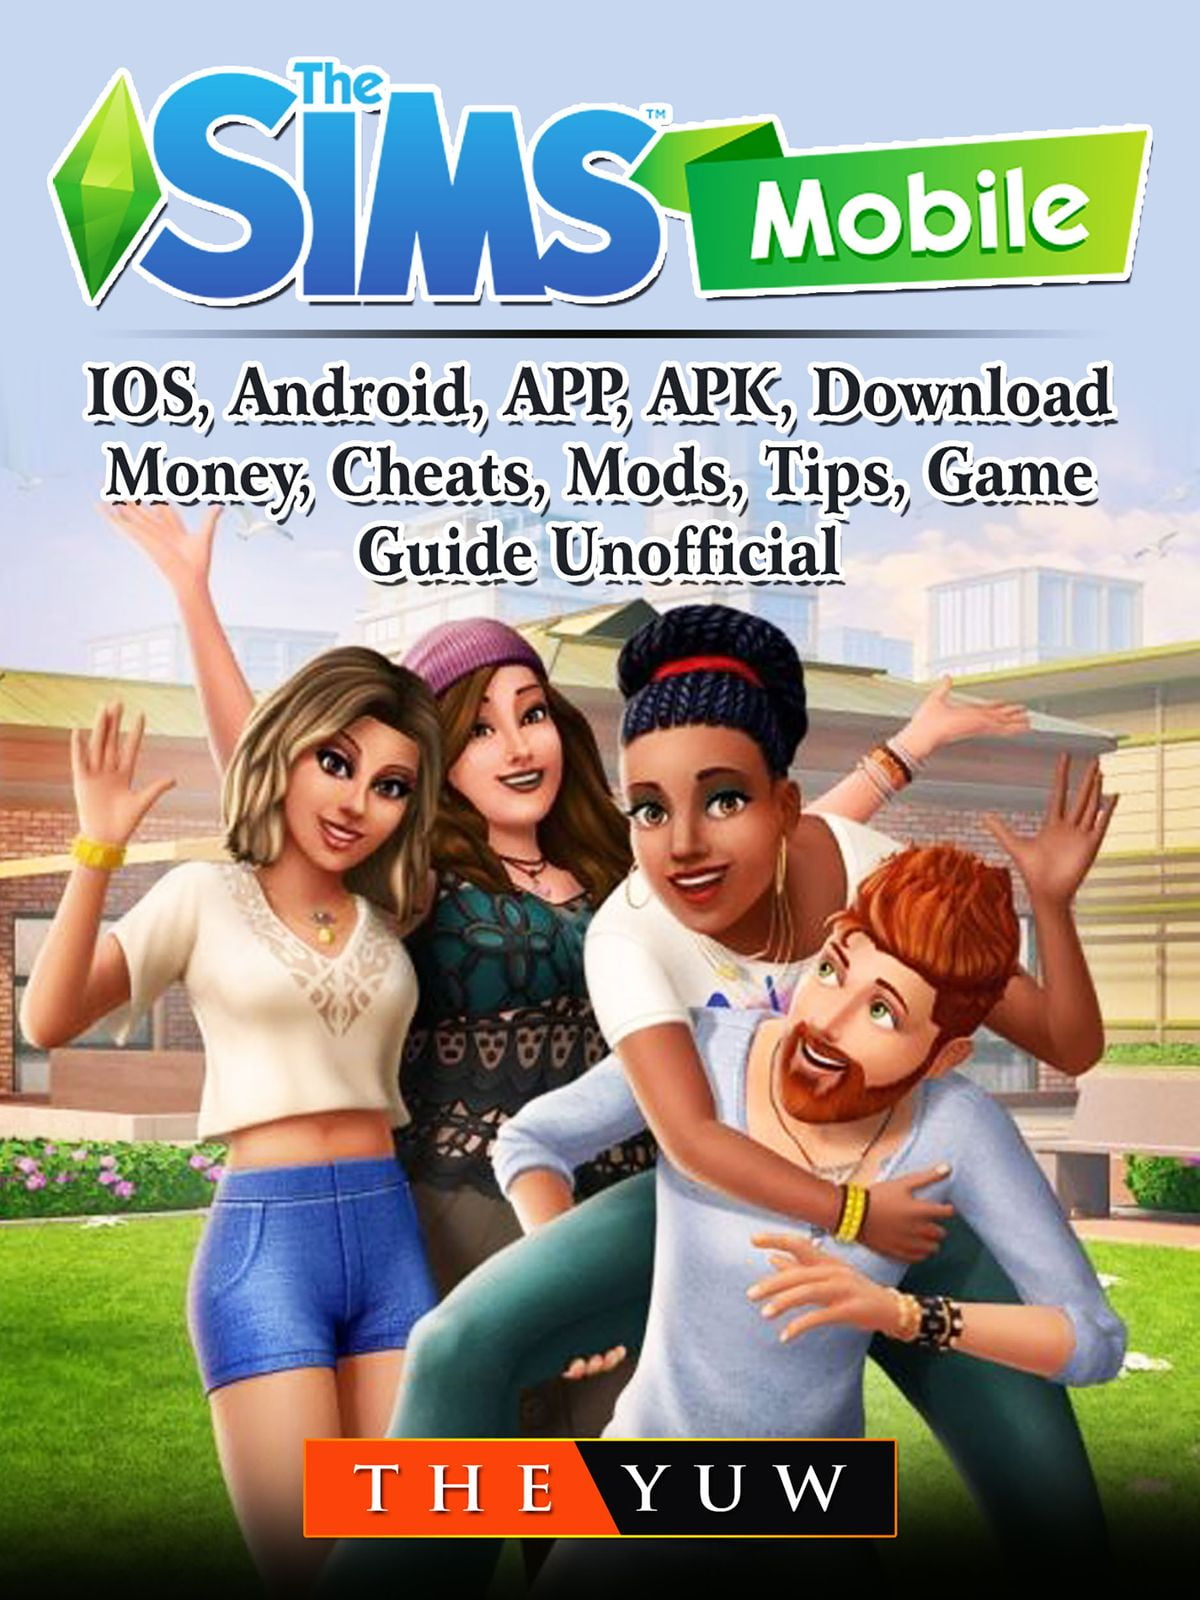 The Sims Mobile Ios Android App Apk Download Money Cheats Mods Tips Game Guide Unofficial Ebook Walmart Com Walmart Com